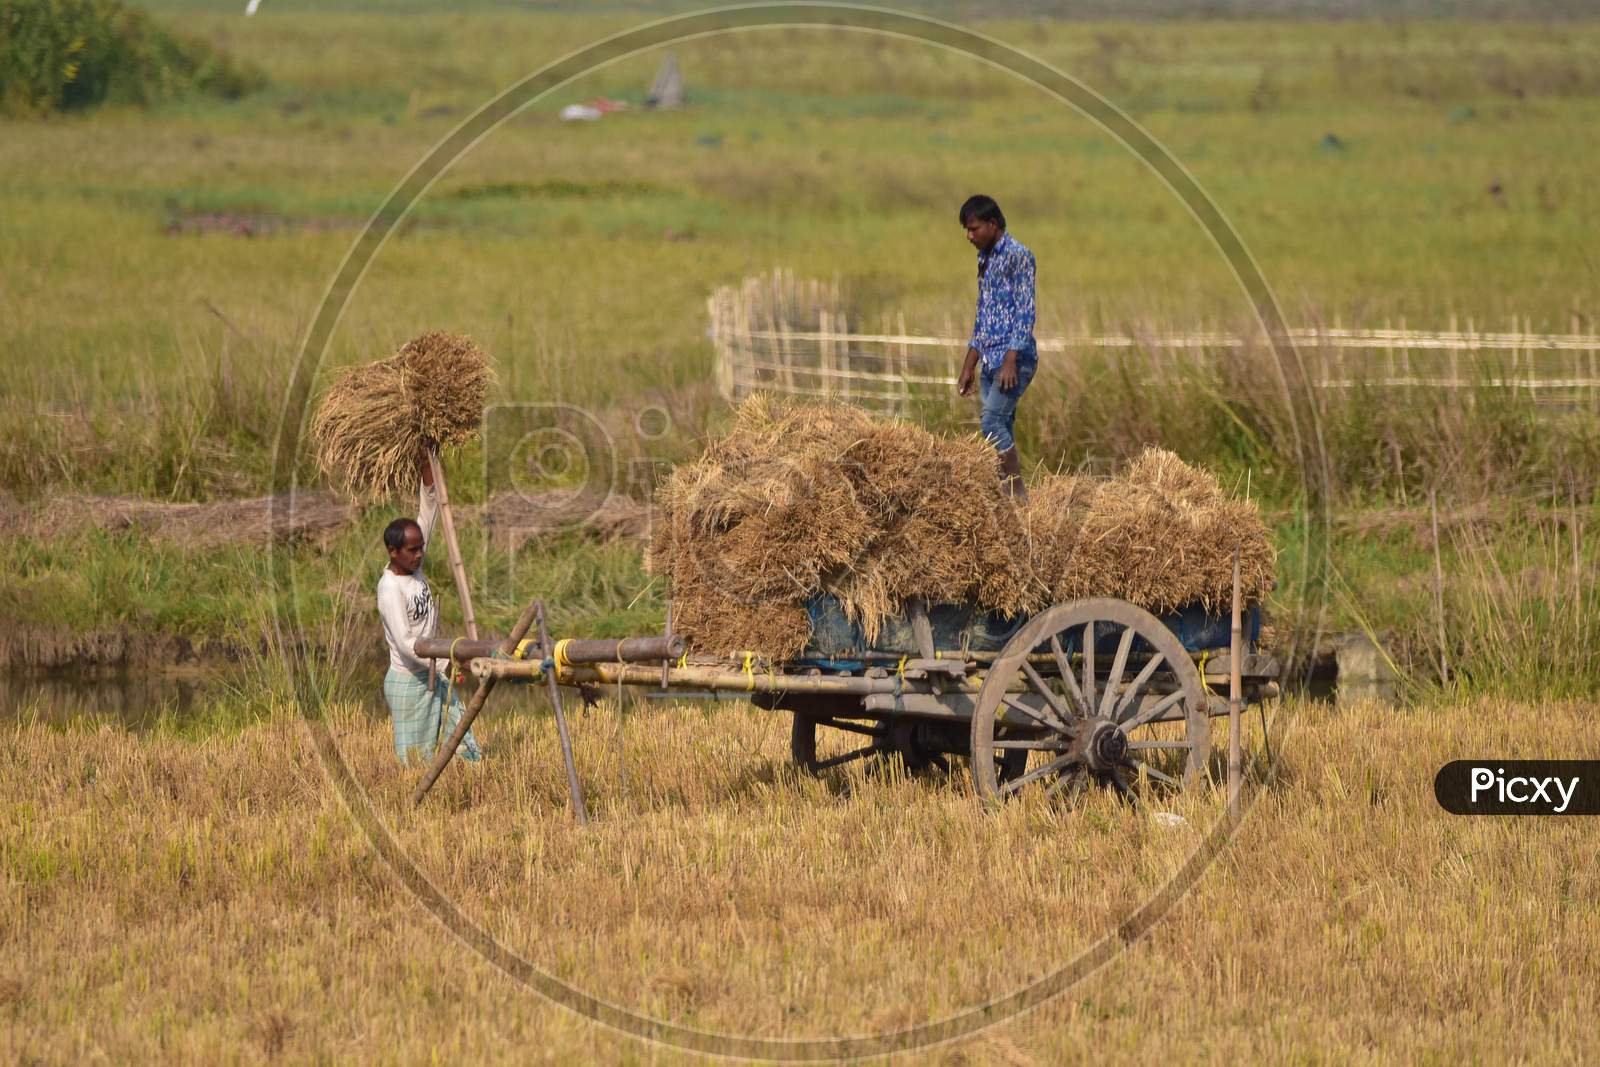 Farmer  loading harvested rice paddy on a cart at Mayong village in Morigaon District of Assam on Dec 6,2020